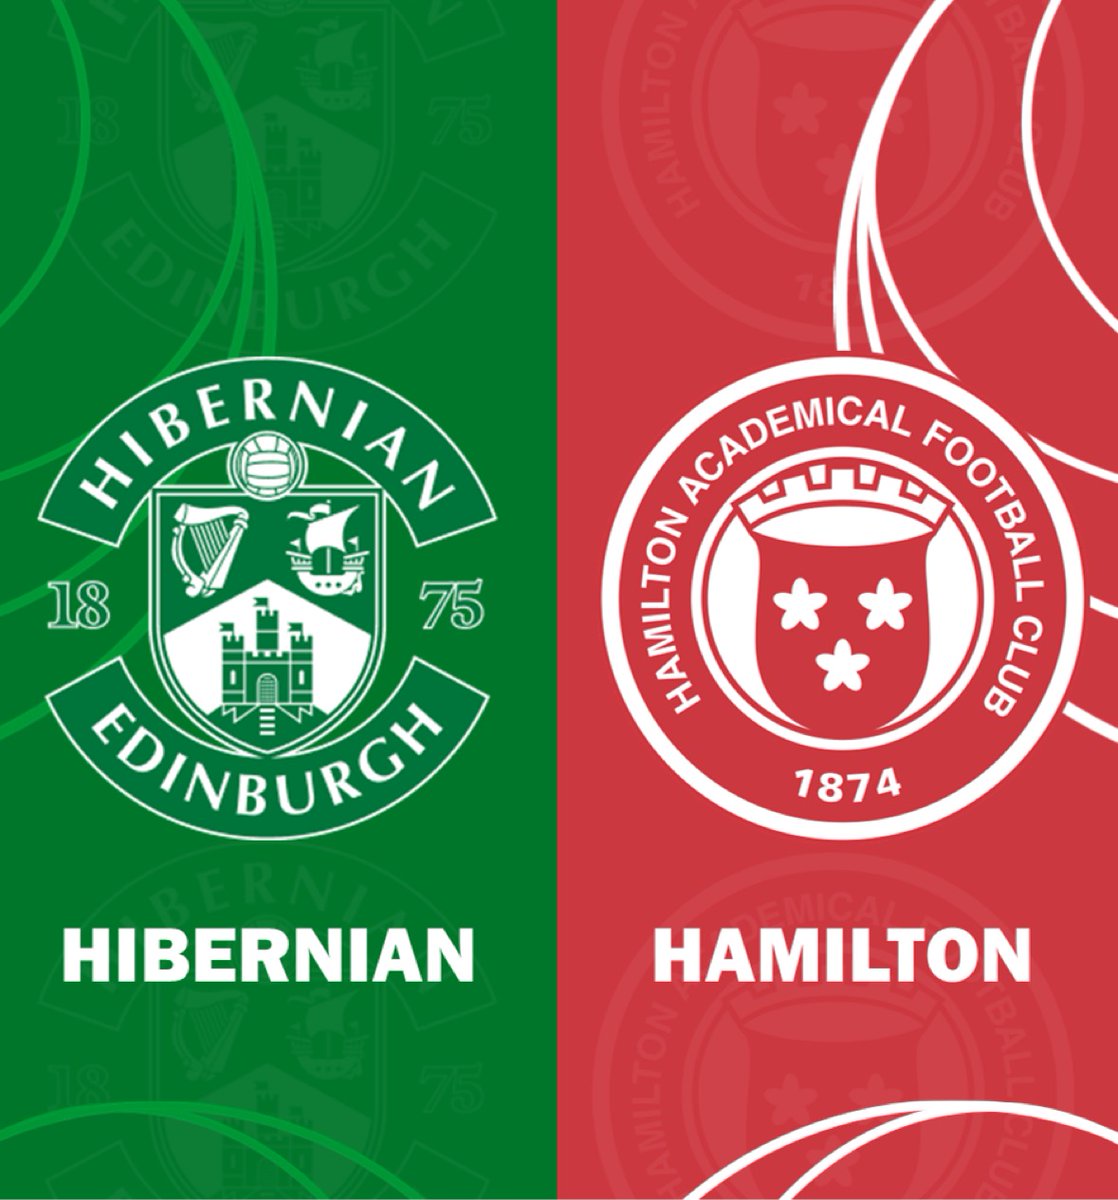 NEXT GEN FIXTURES ⚽️ Back into league action for our 14s, 16s & 18s this weekend. 14s at Meadowbank KO: 3.30pm (Sat) 16s at HTC KO: 4.00pm (Sun) 18s at Hamilton Palace KO: 1.15pm (Sat) Good Luck to everyone involved in games this weekend. 💚